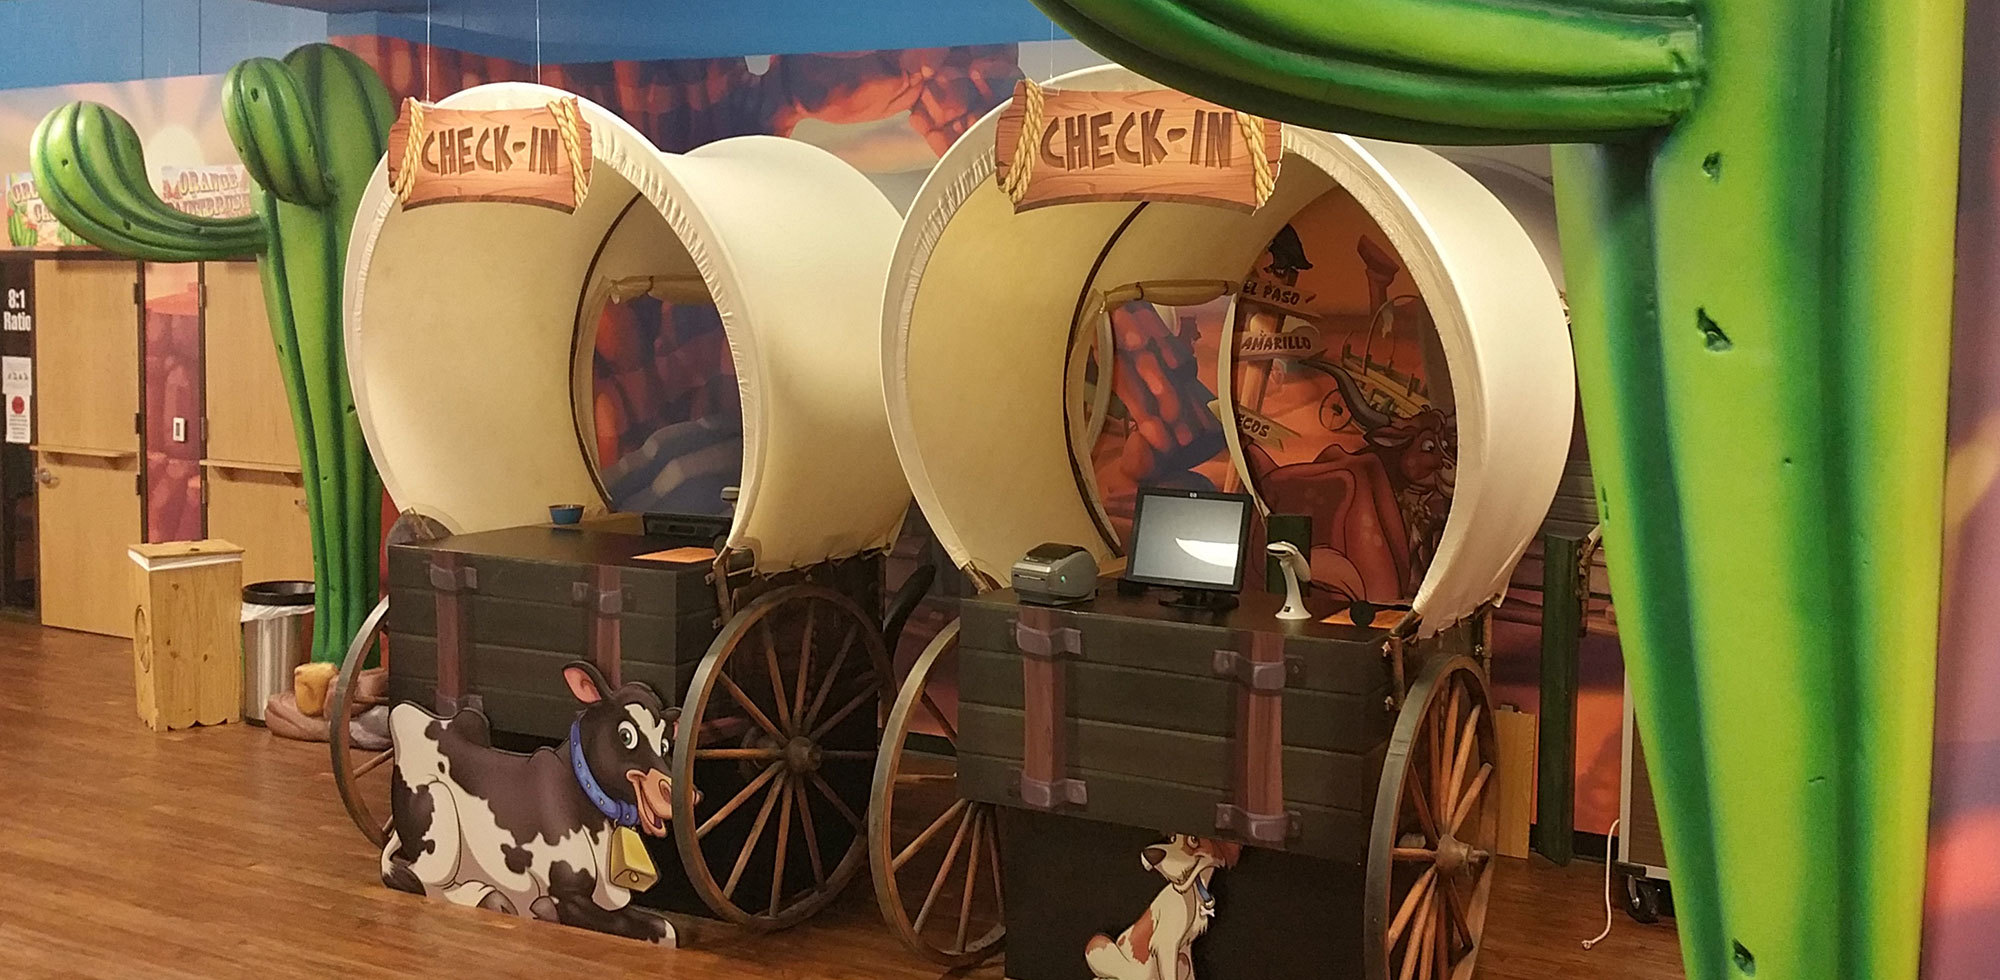 2 life-sized Covered Wagons with sculpted cacti as check in stations in a Western Themed space at Crossroads church in Odessa TX